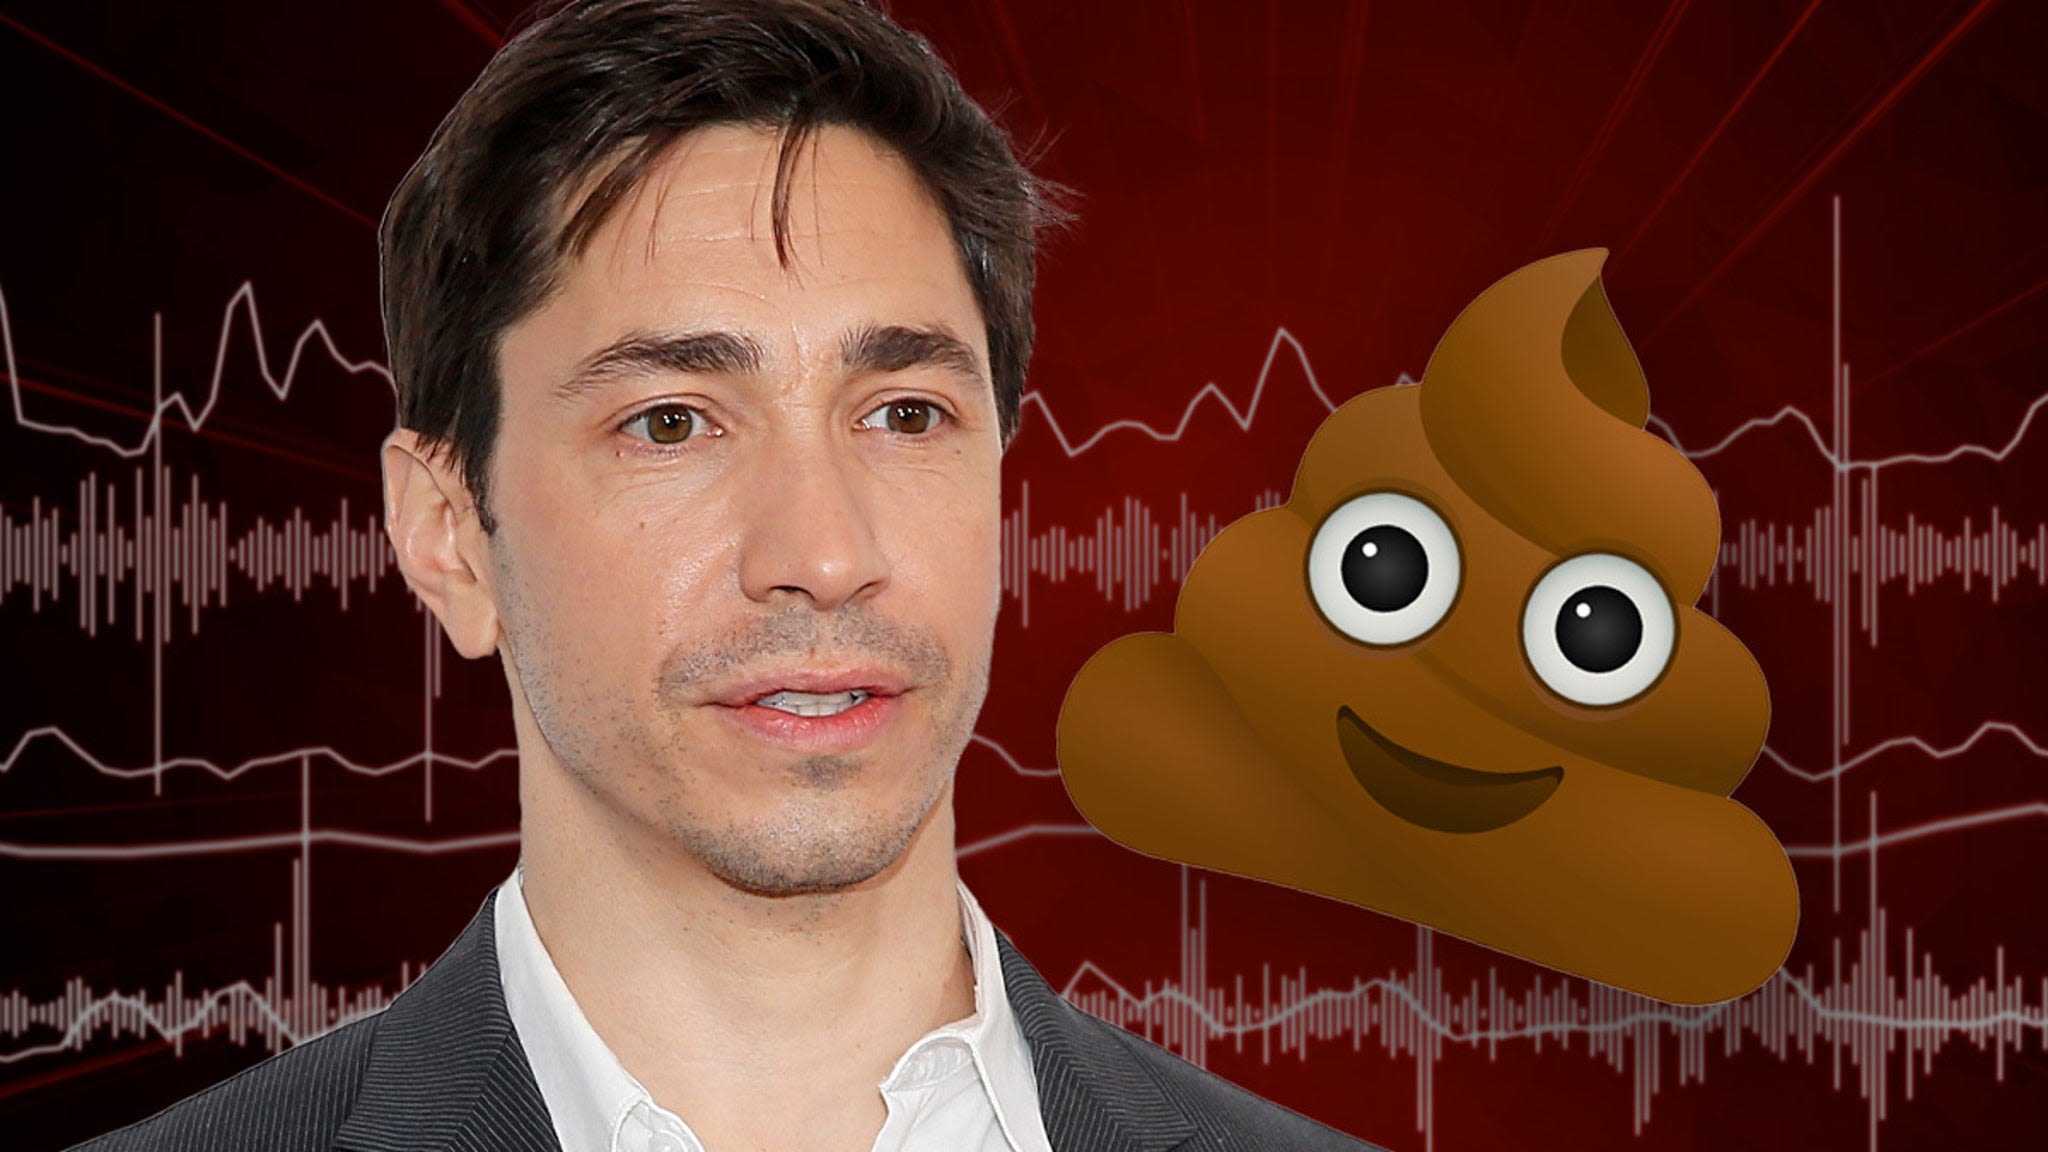 Justin Long Once Pooped the Bed While Wife Kate Bosworth Slept Next to Him